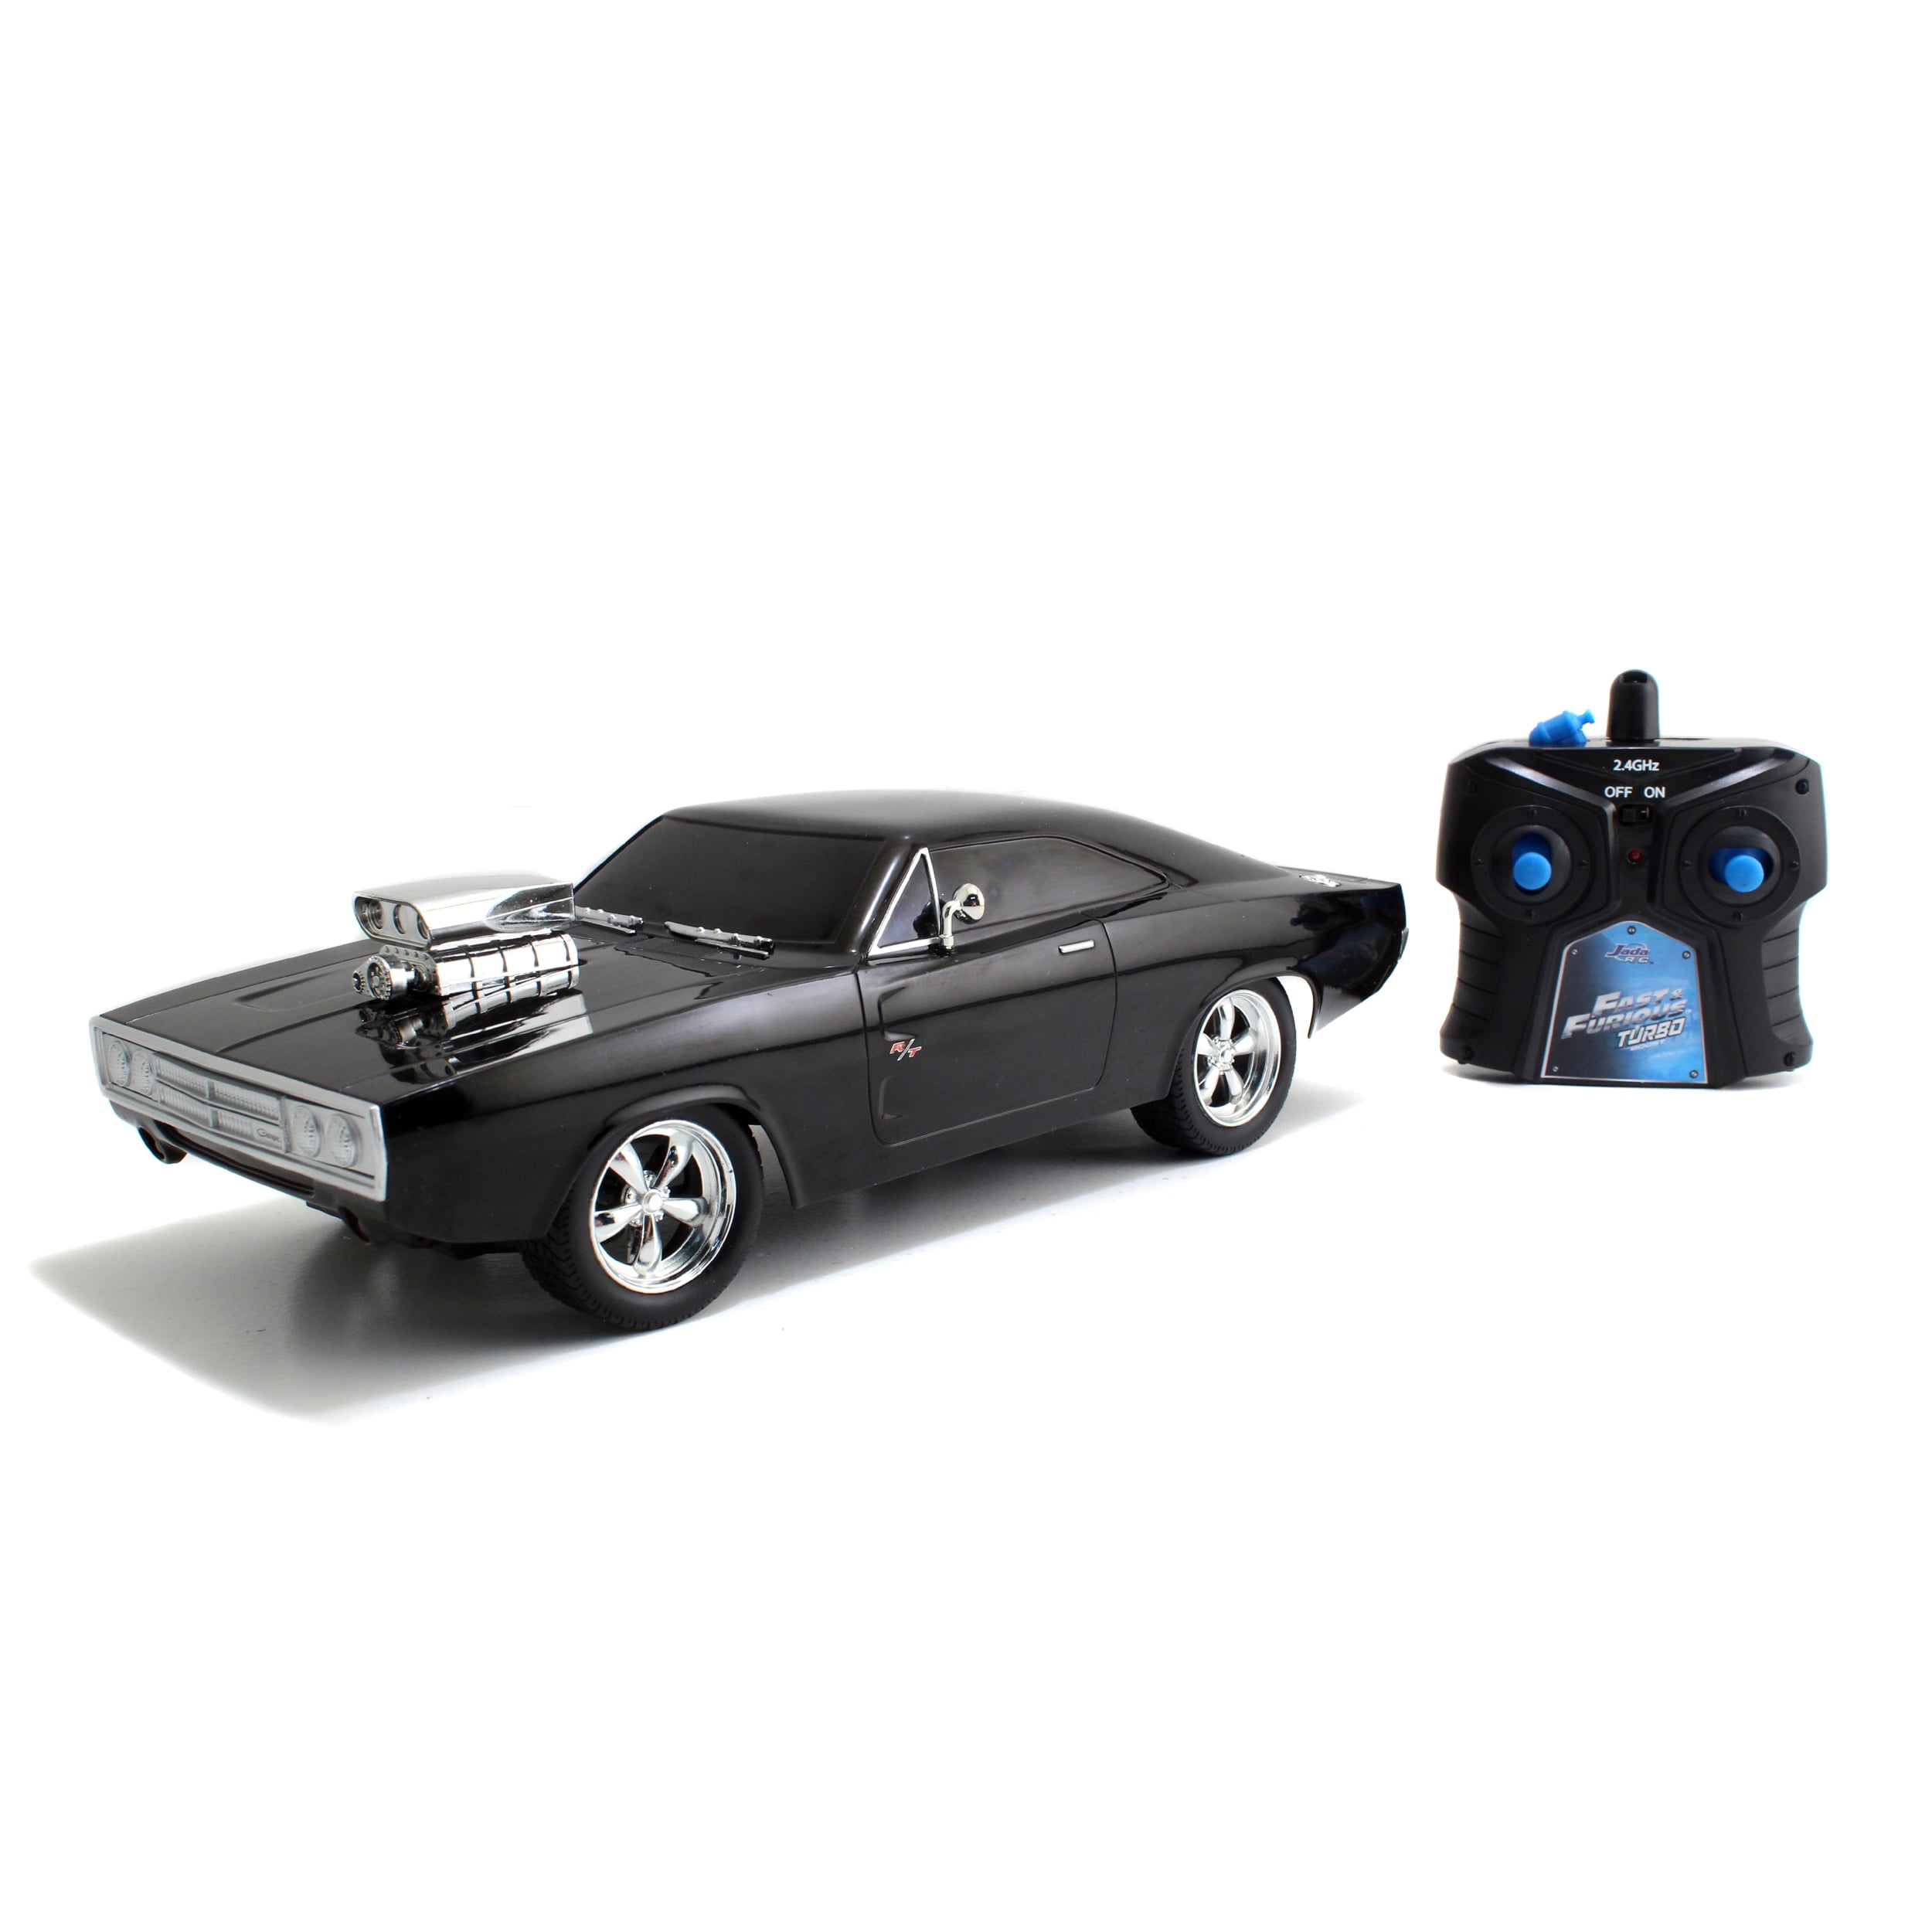 Jada Toys Fast and Furious 1 24 Radio Control Car Brian's Toyota Supra RC for sale online